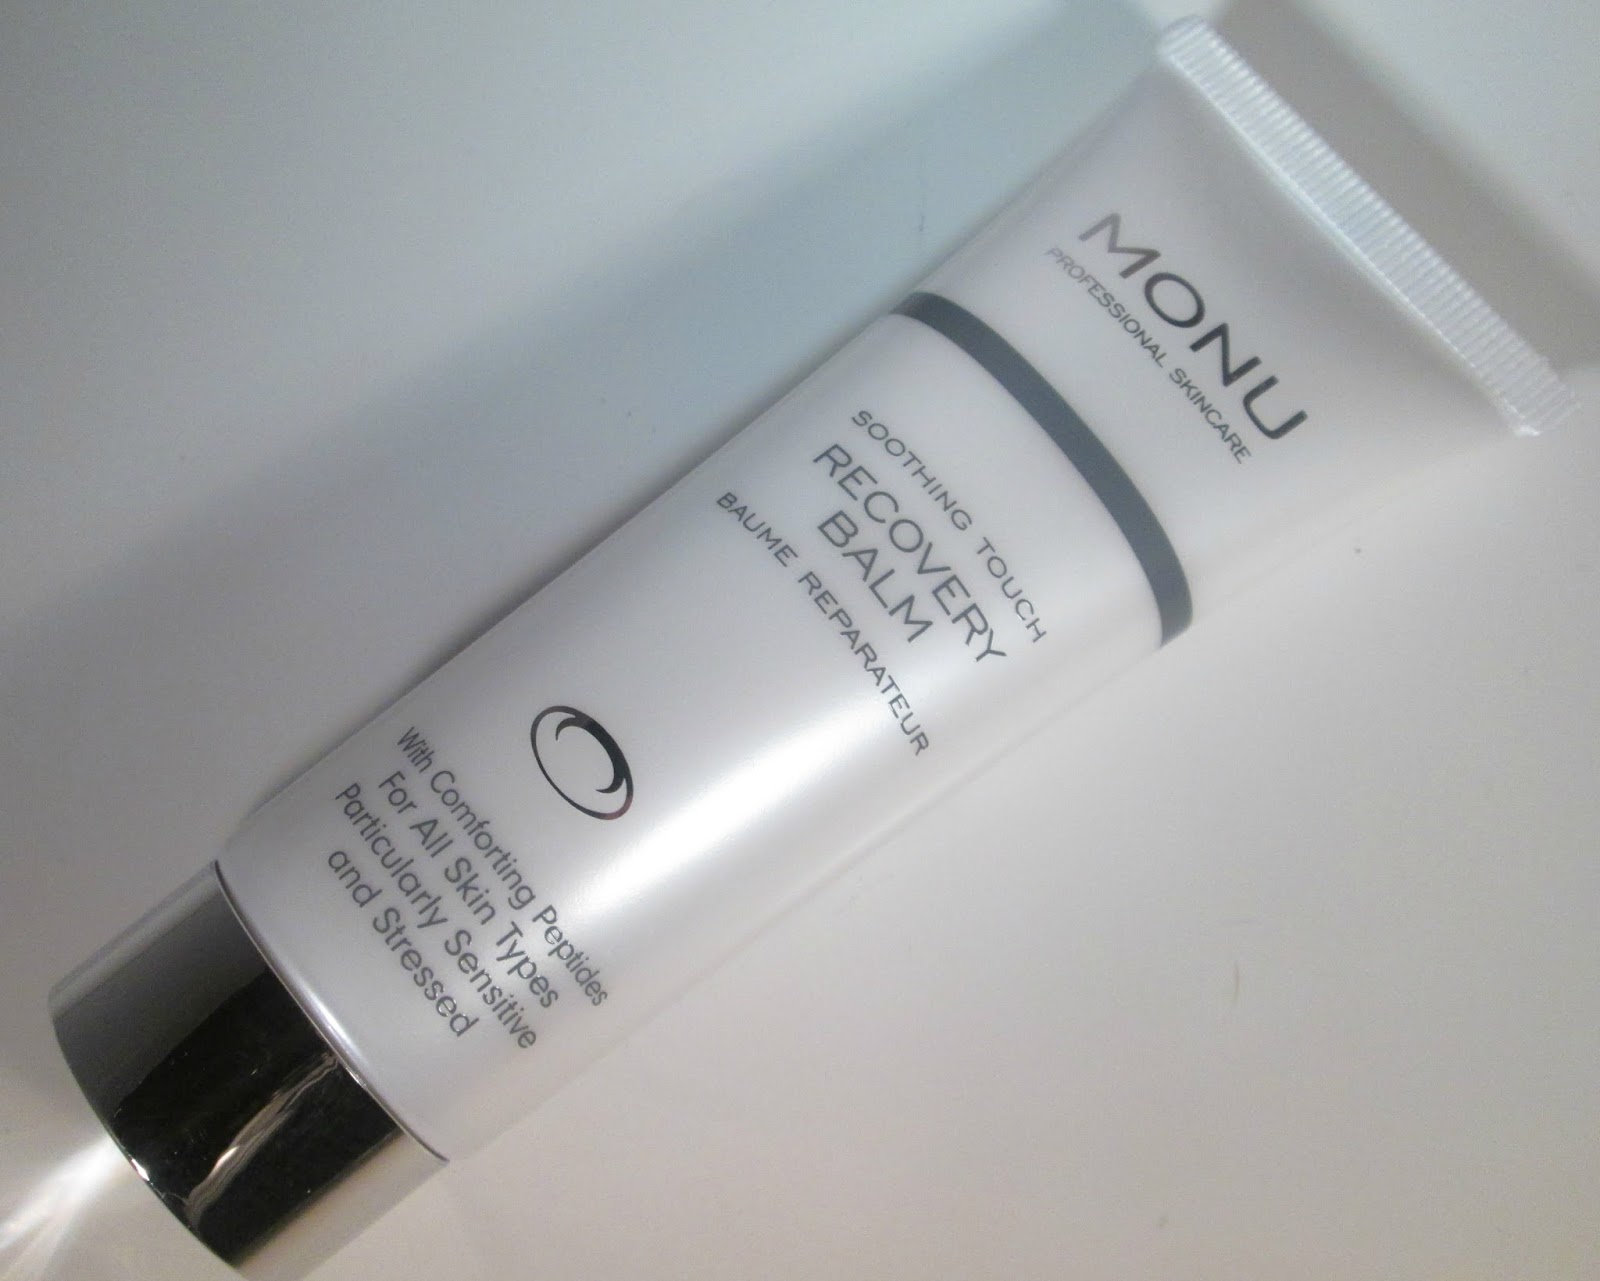 MONU Soothing Touch Recovery Balm | Review